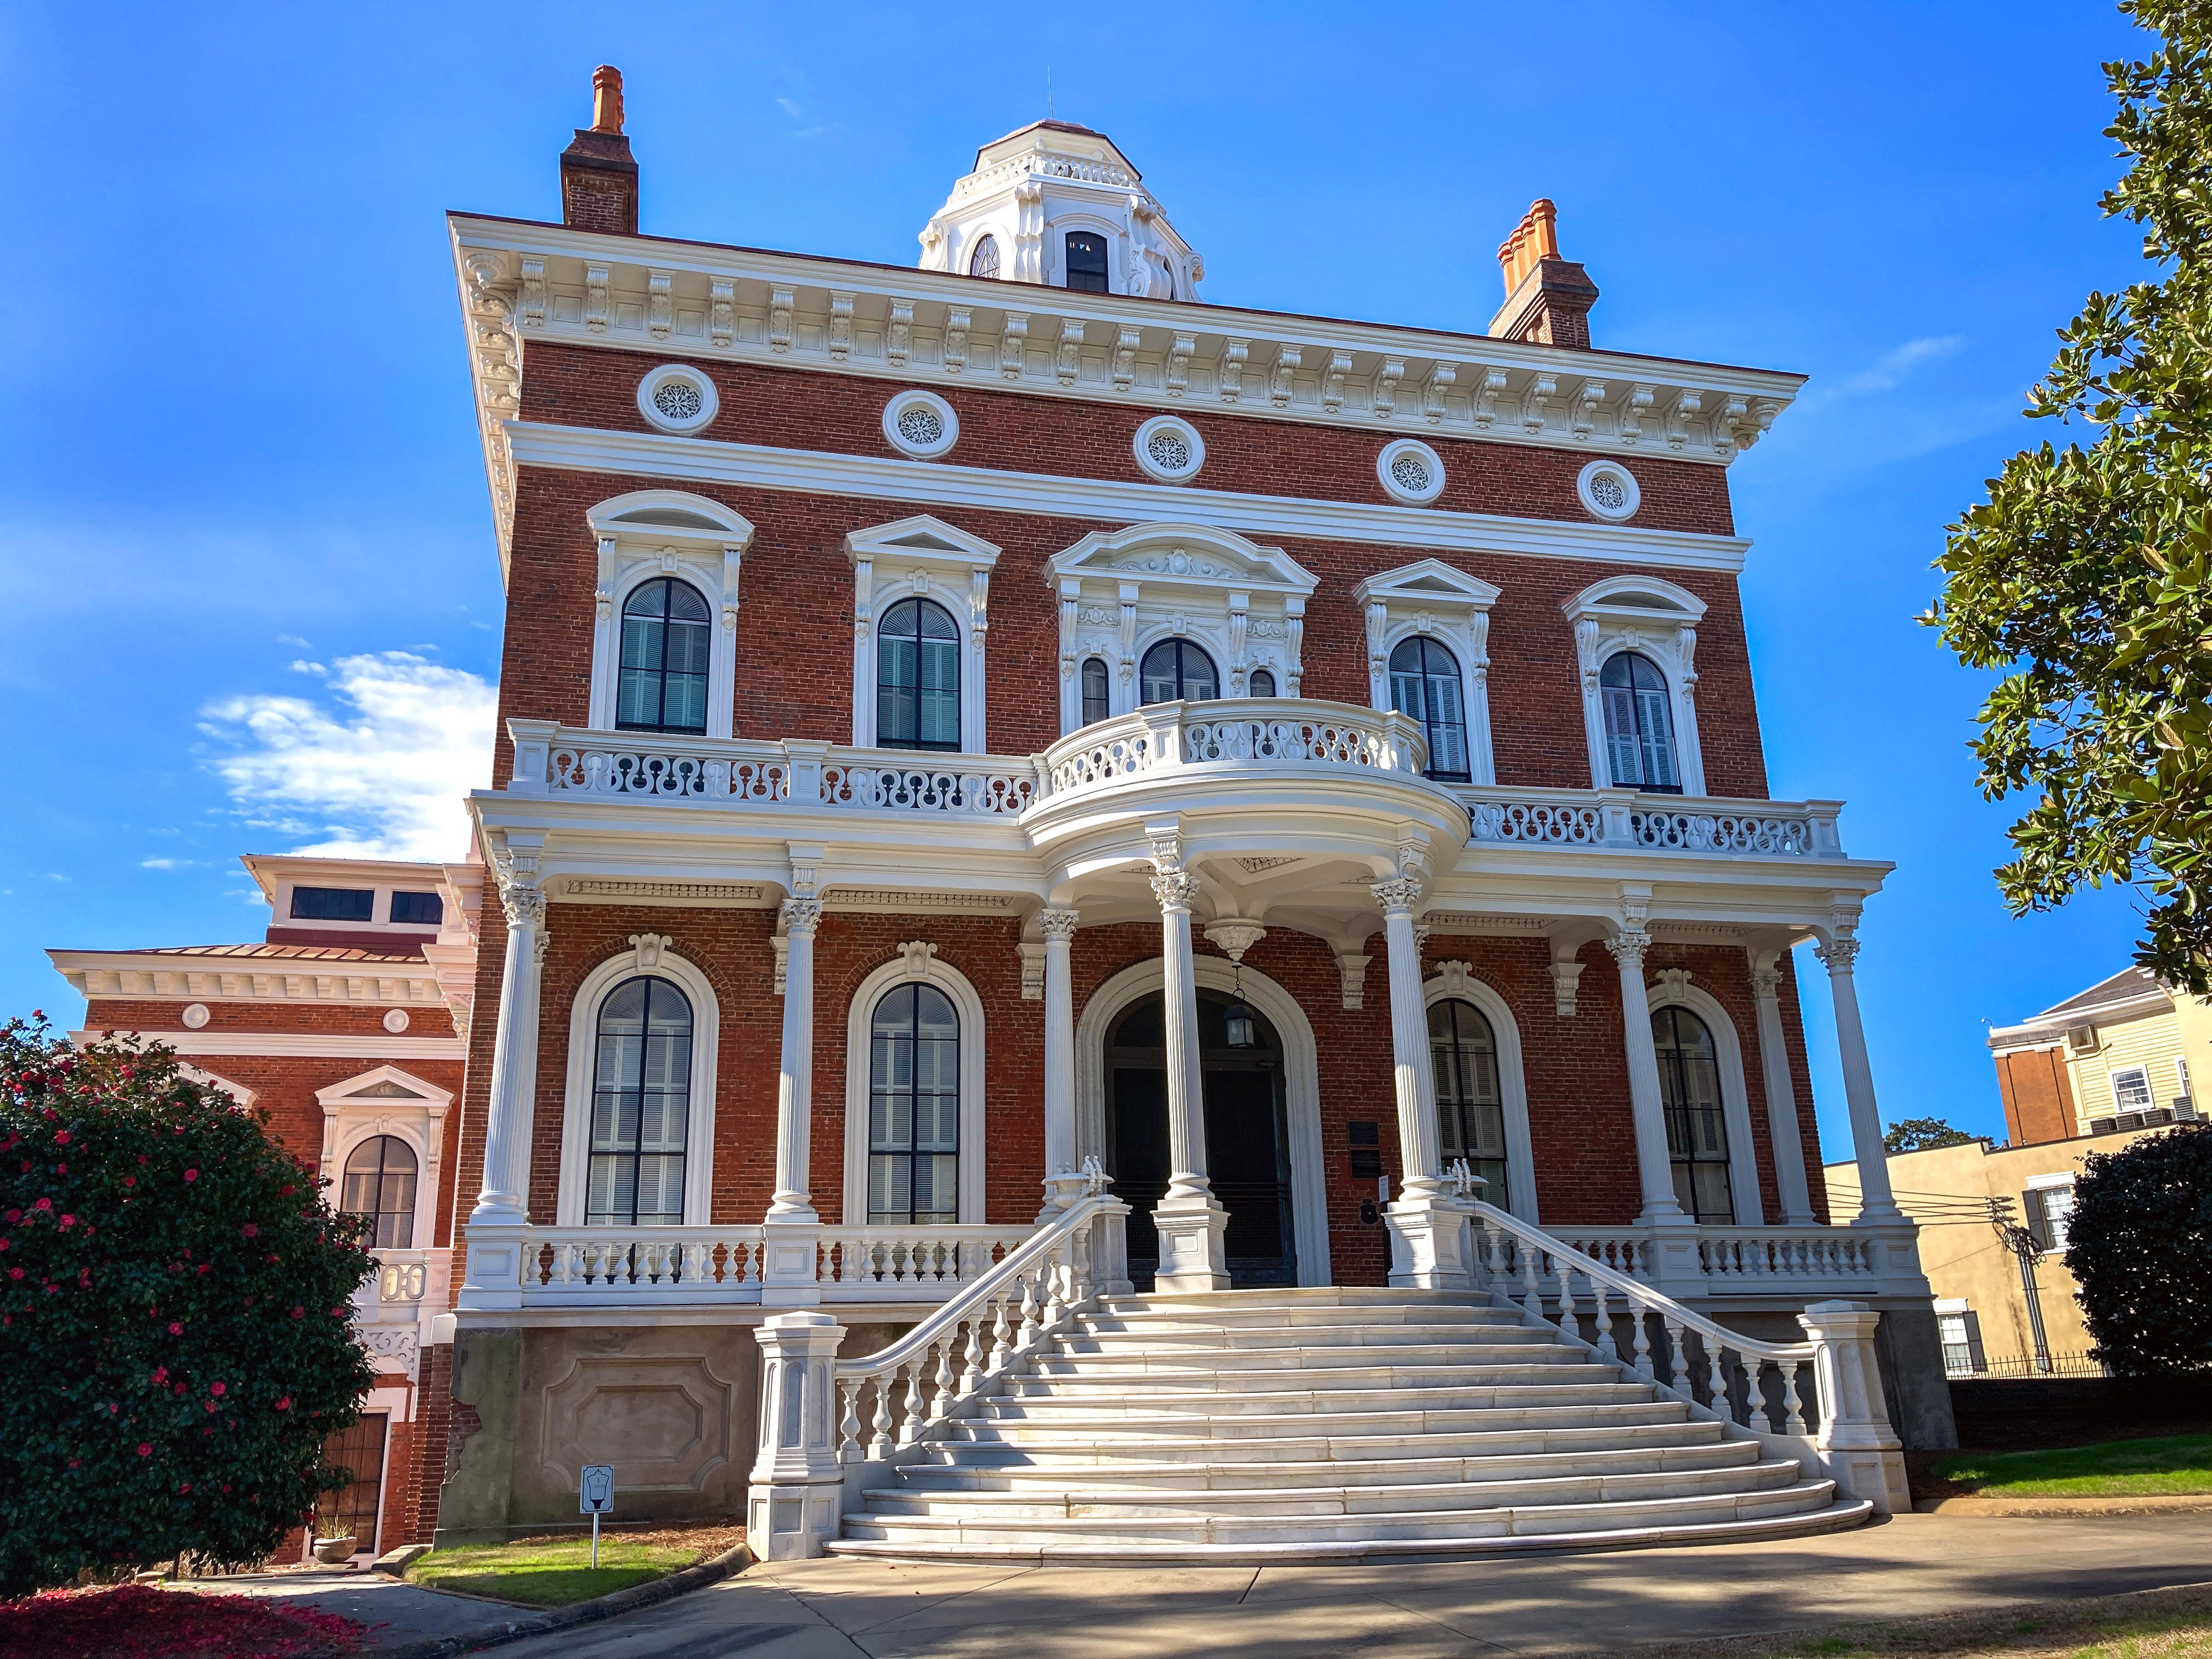 Daily Snap #8: The Hay House is a magnificent historical landmark in the heart of Macon, Georgia. Construction began in 1855 and was completed in 1859. The house was recognized as a National Historic Landmark in 1974. It covers an area of 16,000 square feet and comprises 24 principal rooms.